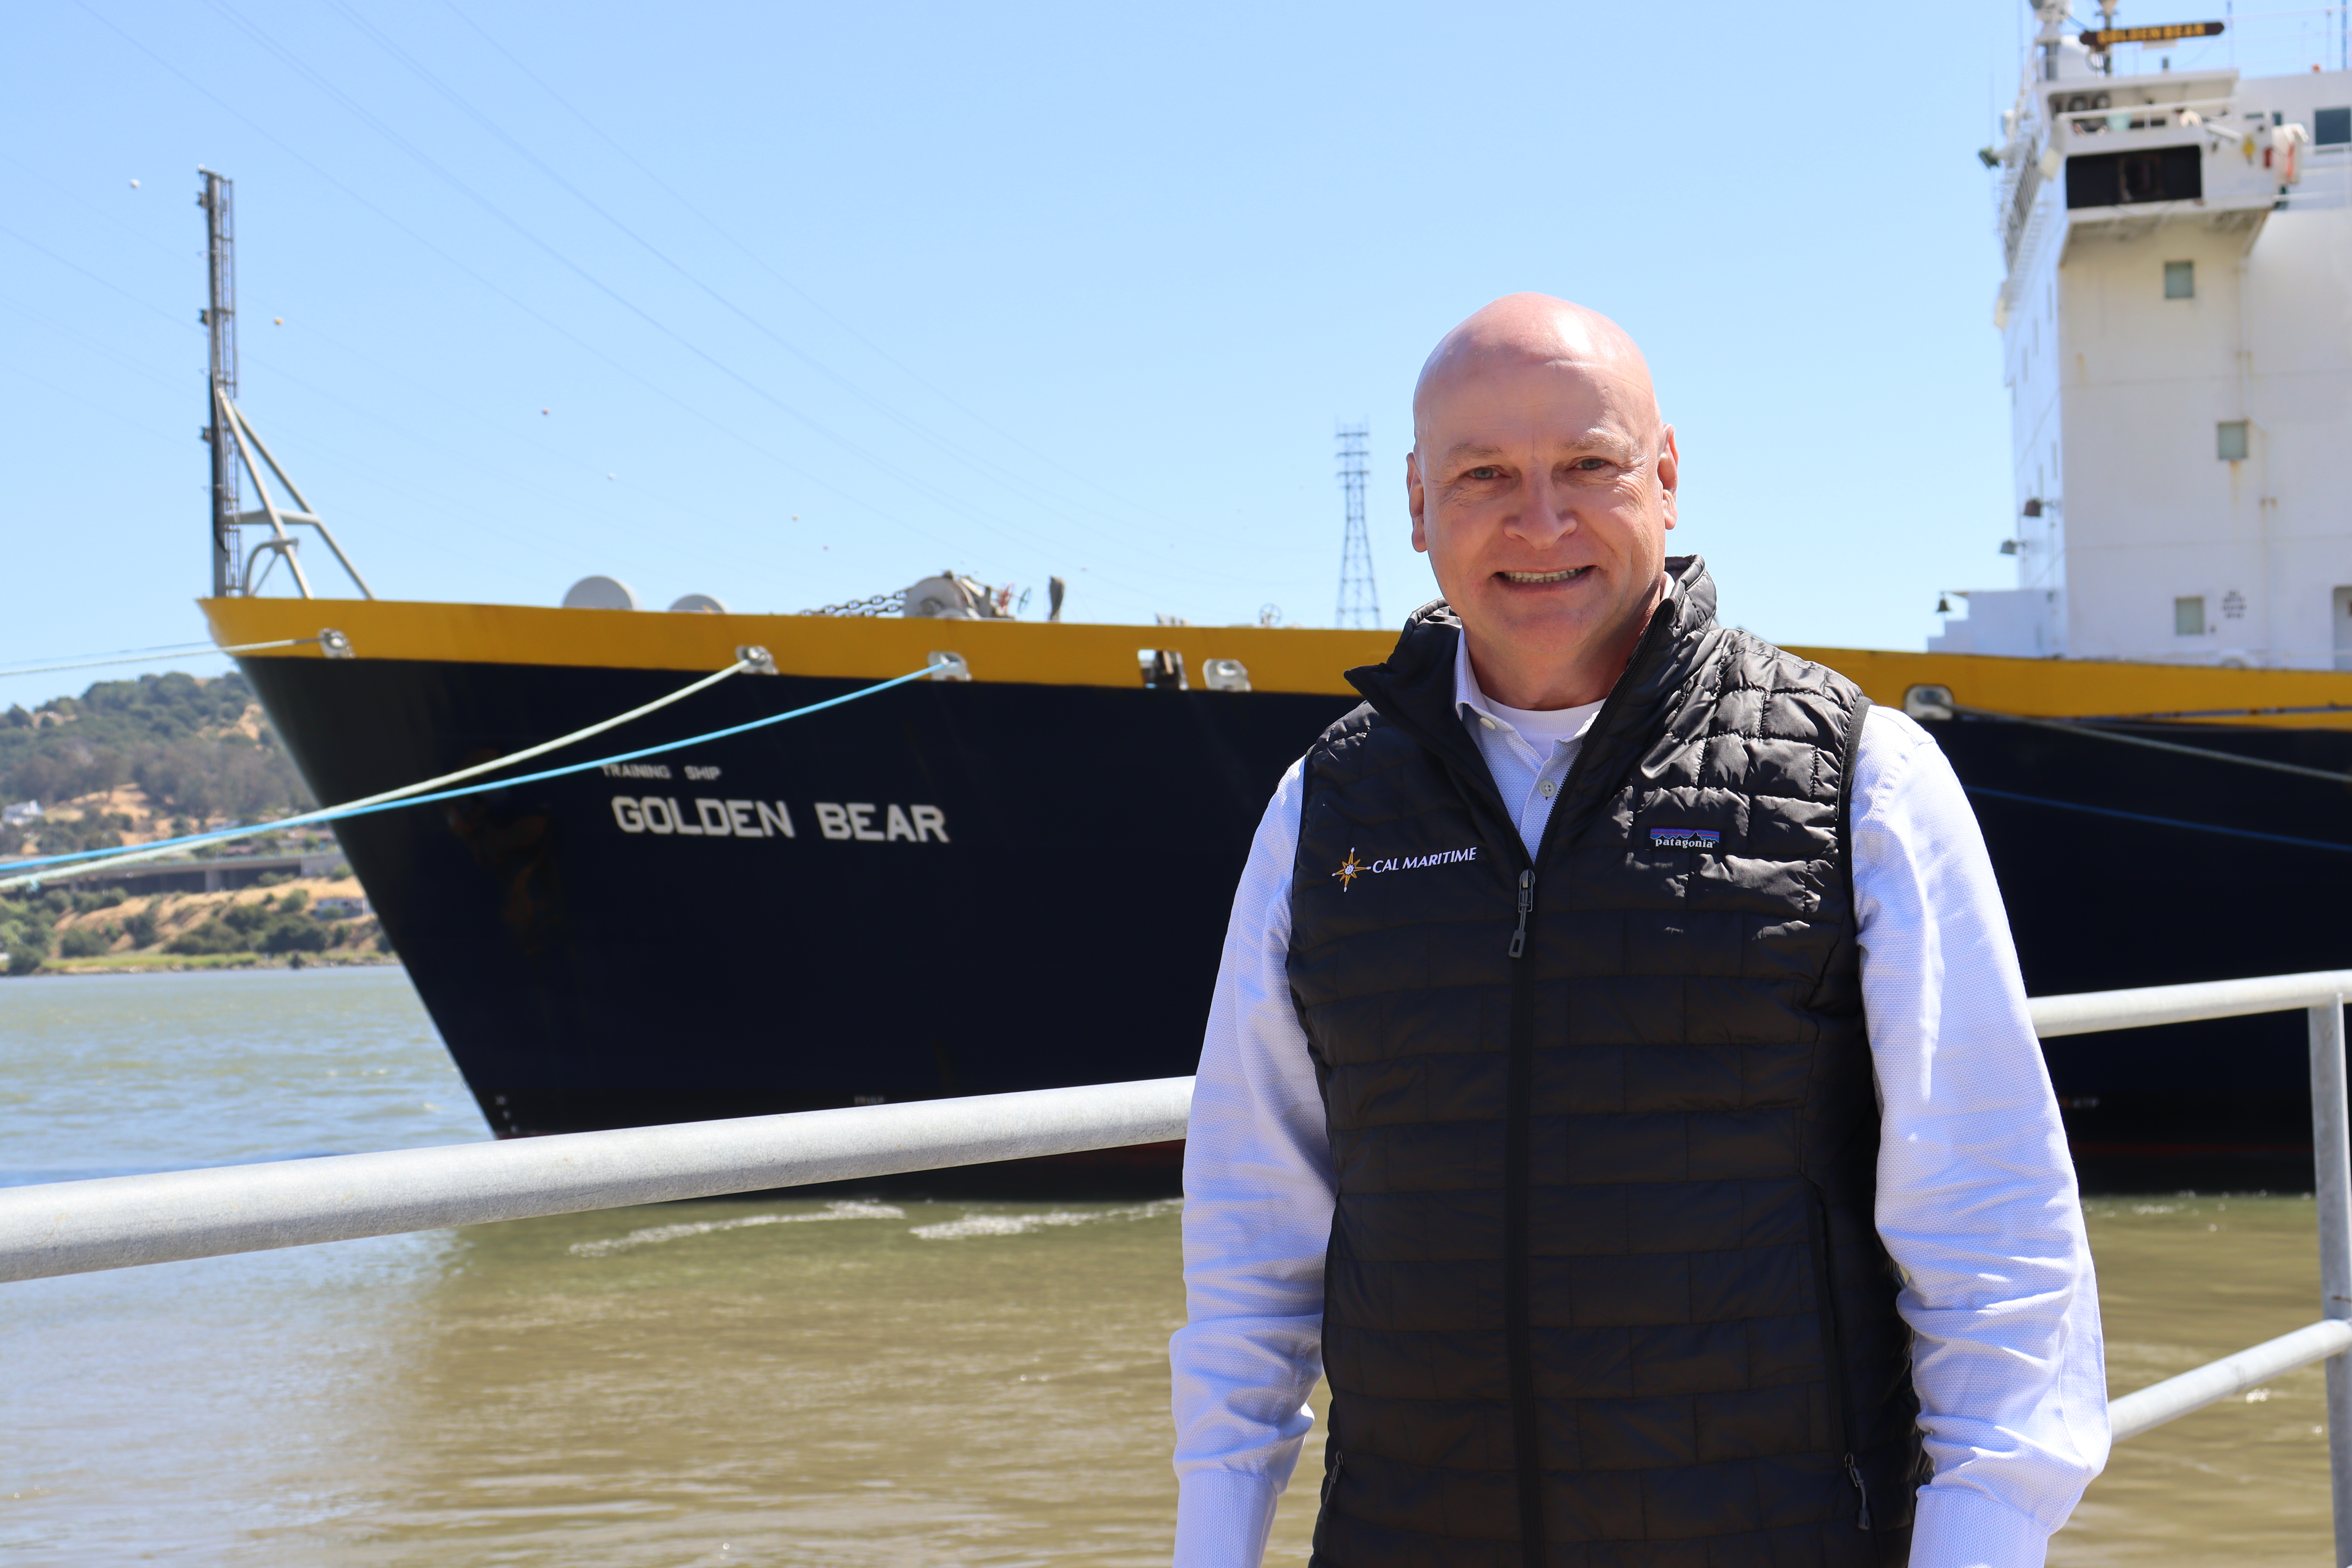 President Dumont Marks First Day by Welcoming the TSGB Back to Vallejo